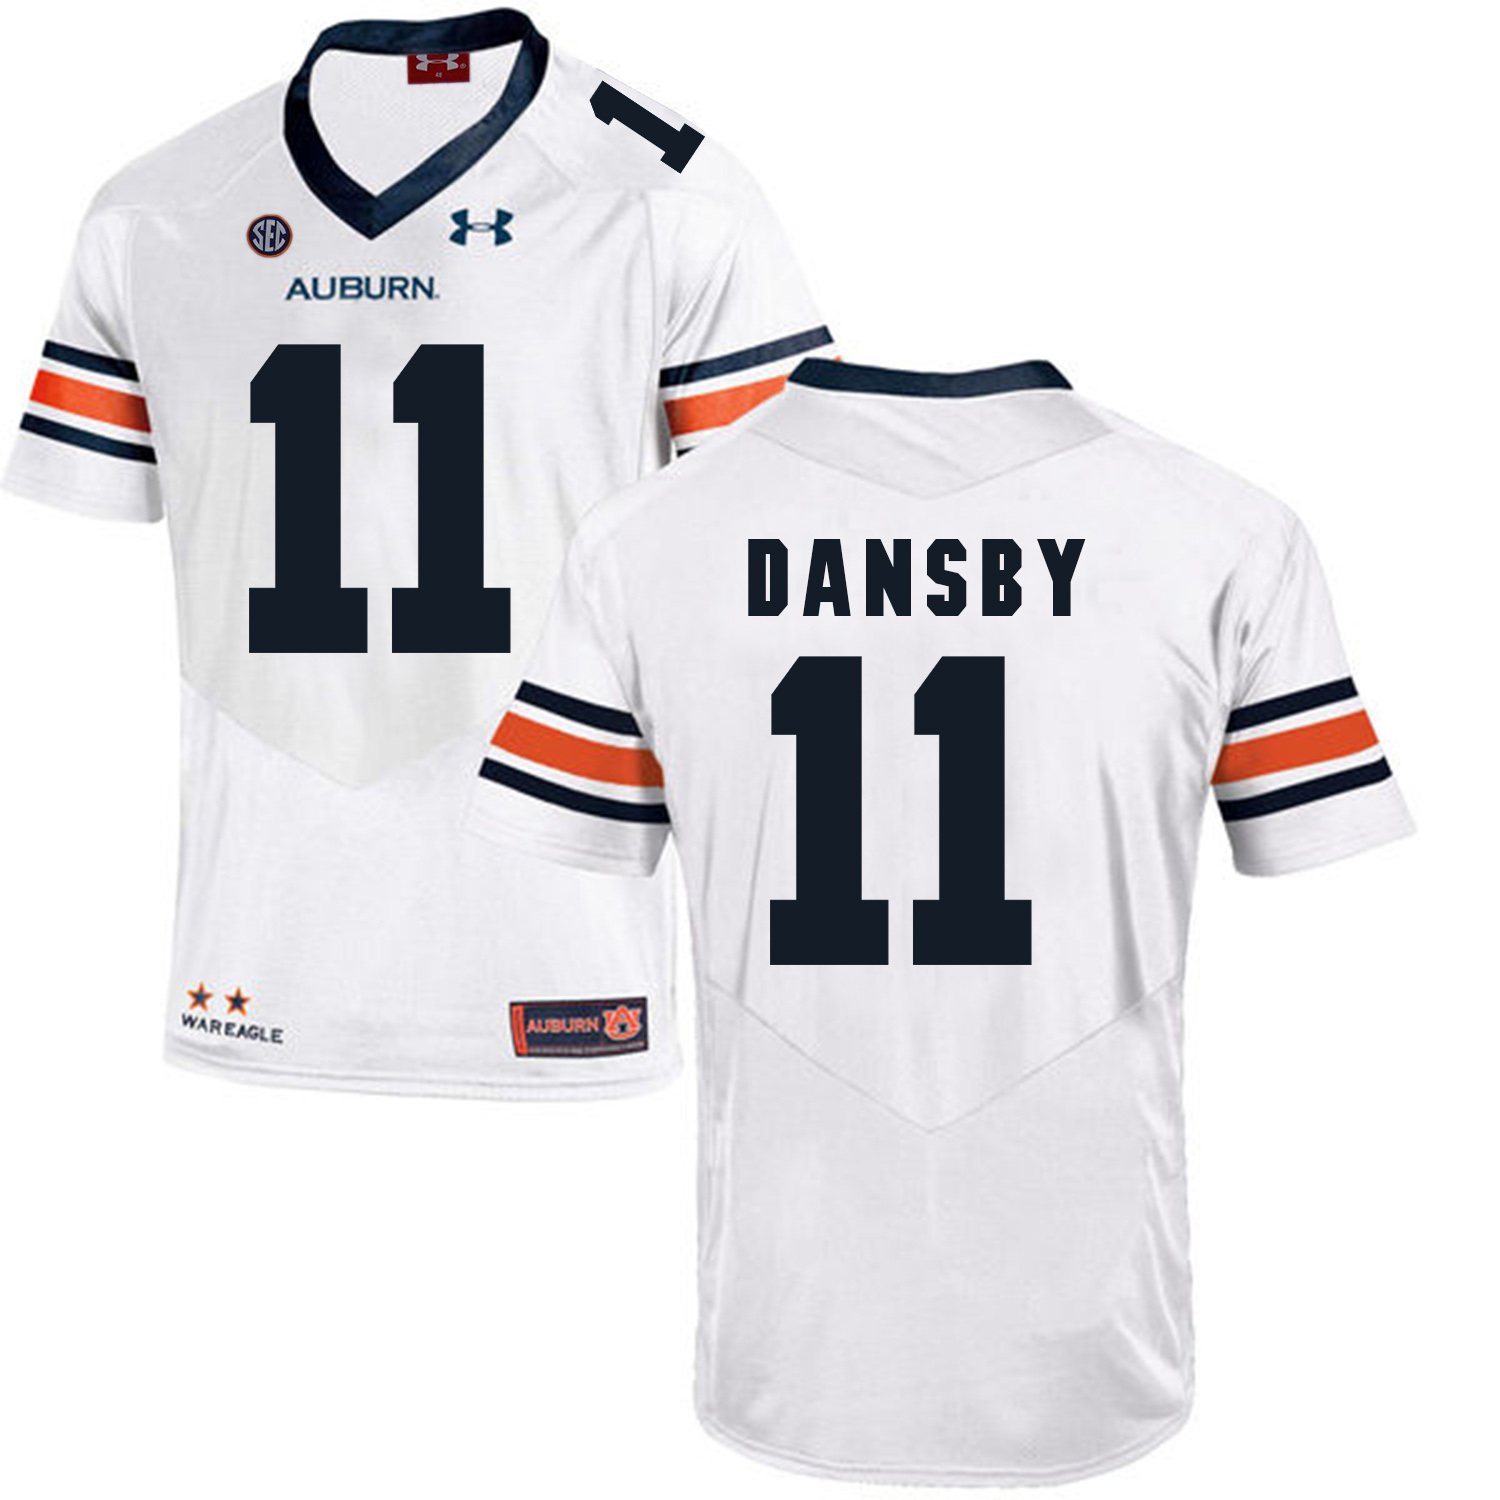 Auburn Tigers 11 Karlos Dansby White College Football Jersey